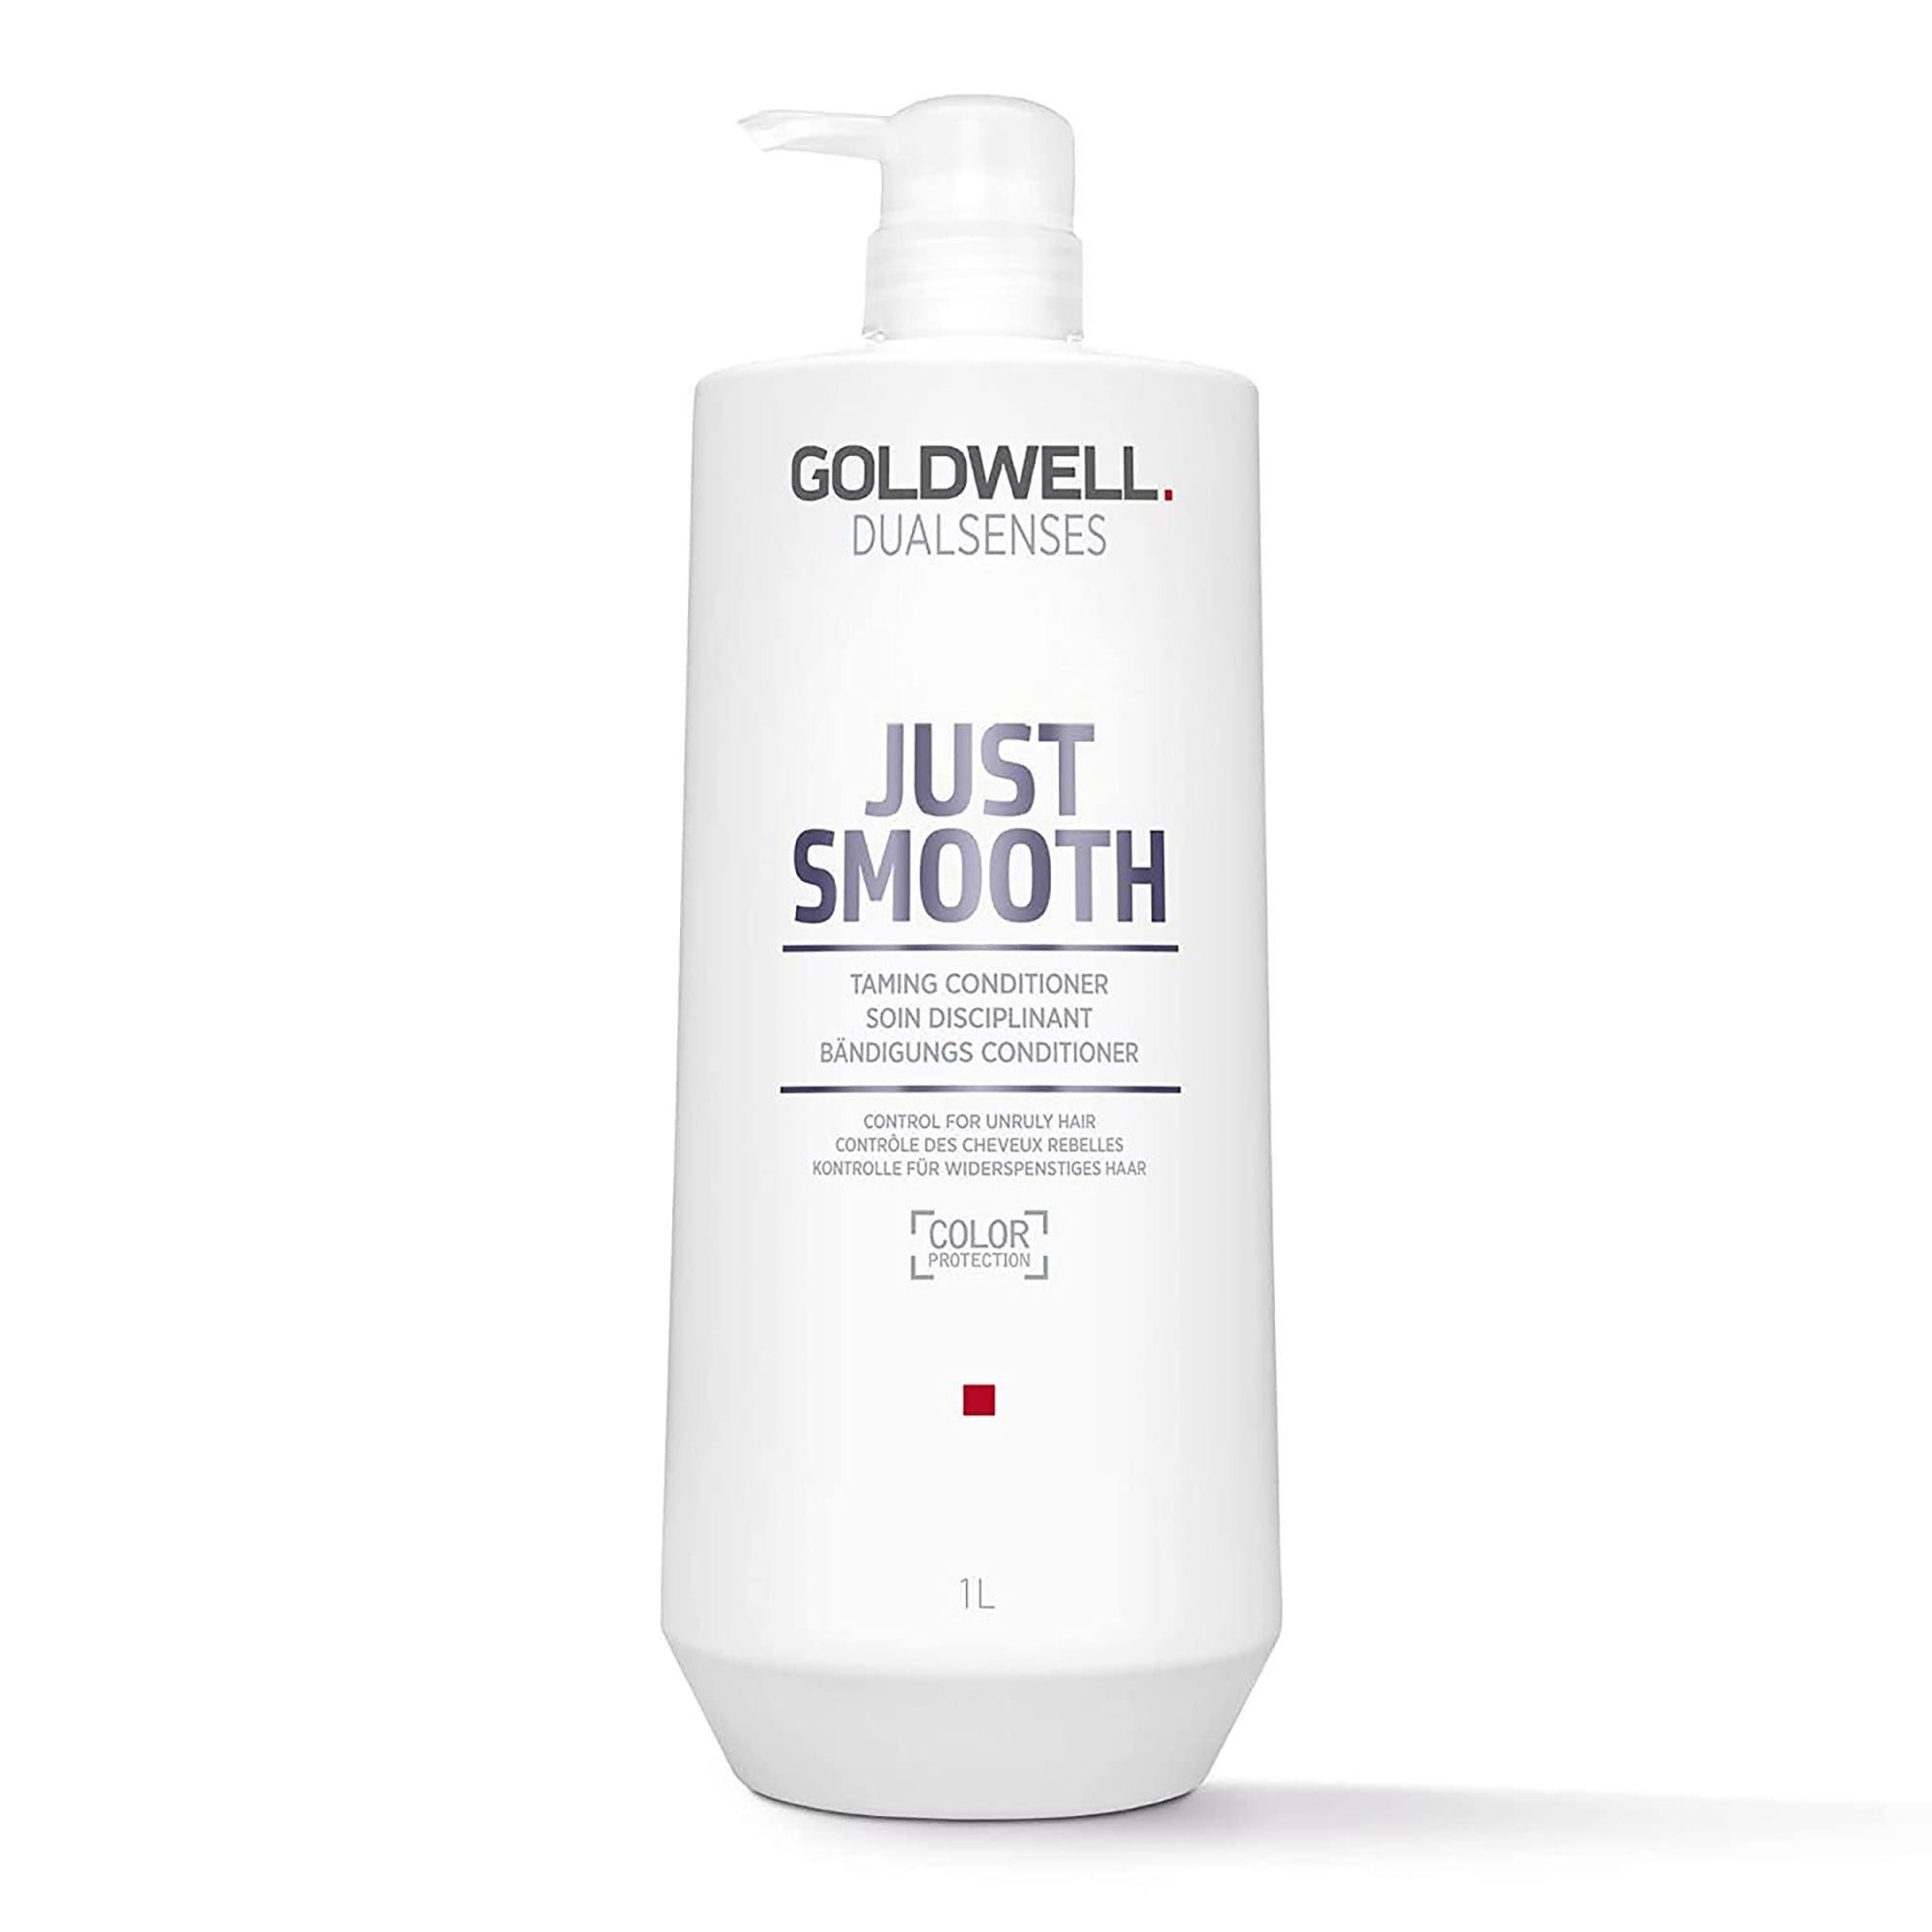 Goldwell Dualsenses Just Smooth Taming Conditioner / 33.OZ